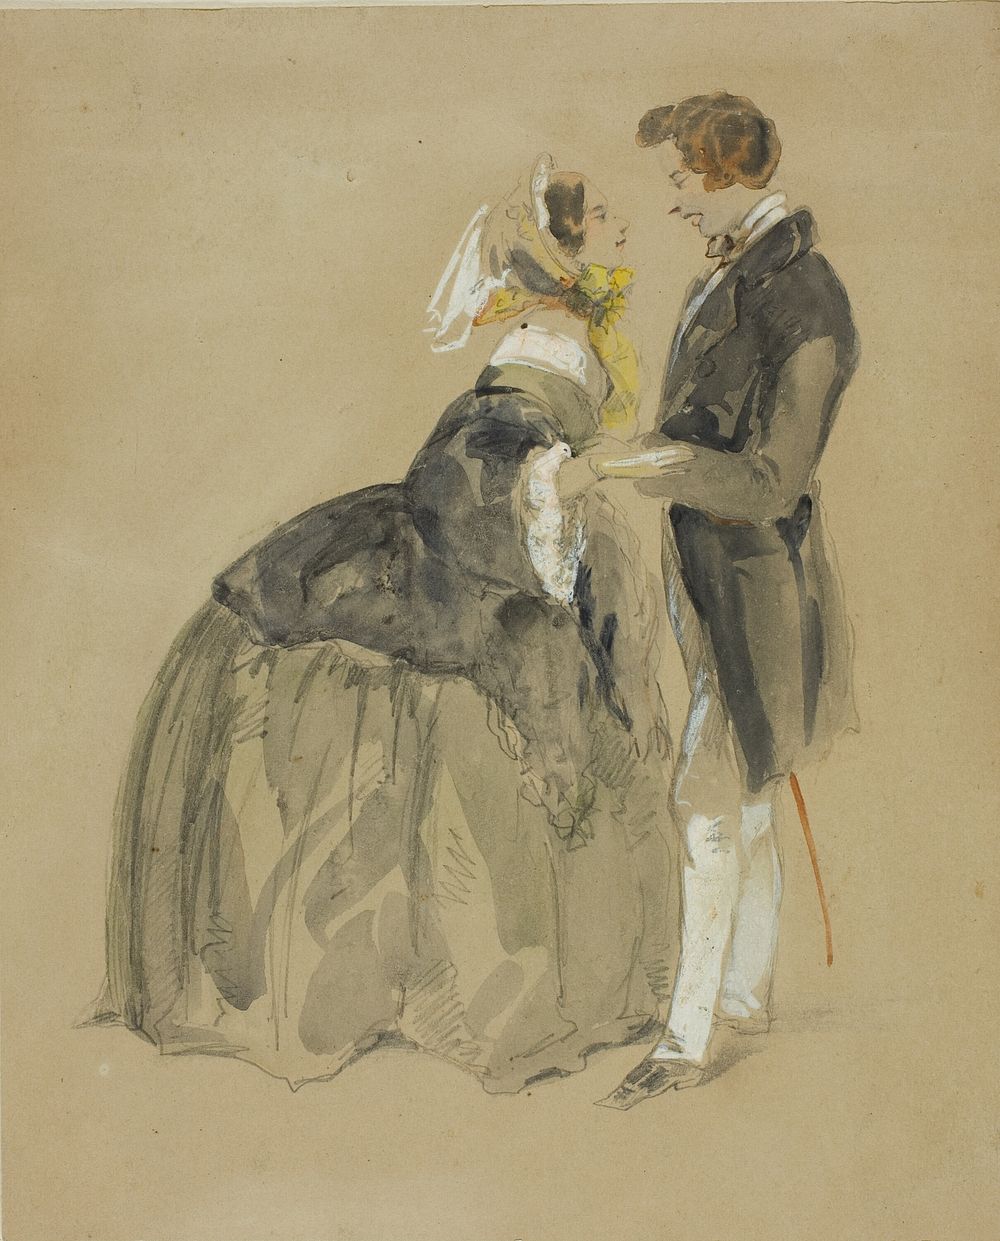 The Couple by Charles-Edouard de Beaumont